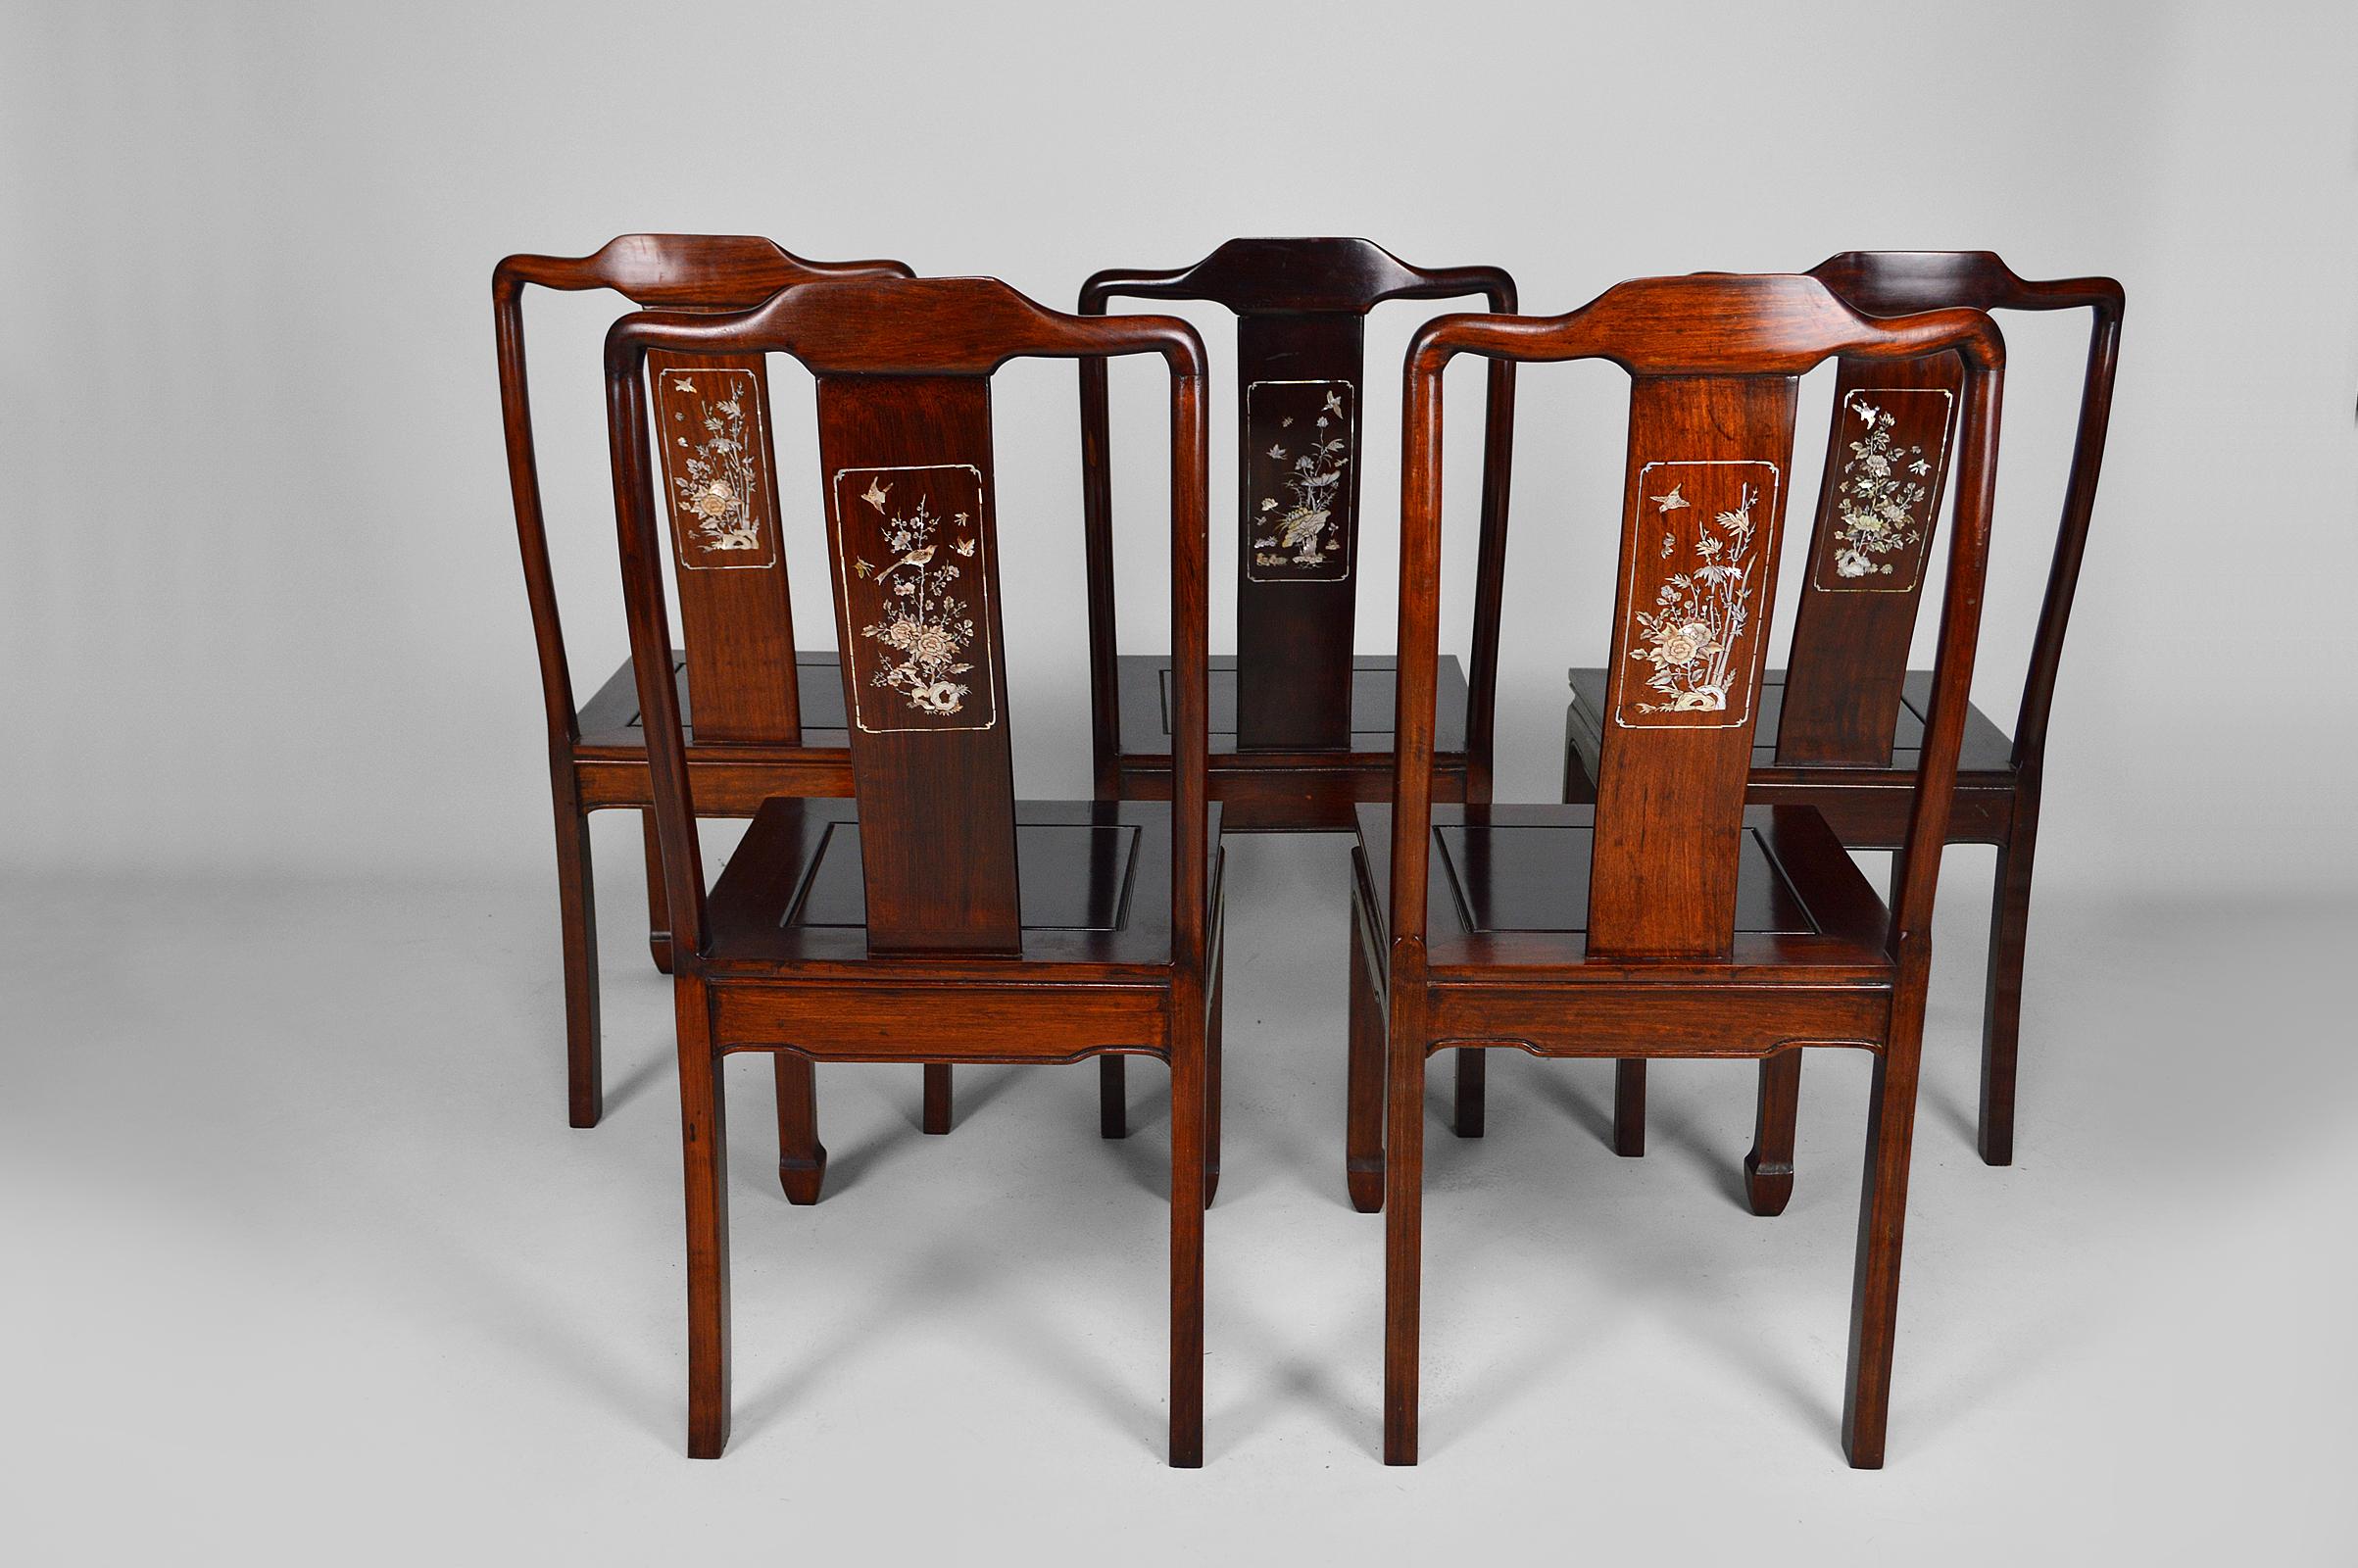 Chinese Set of 5 Asian Inlaid Wooden Chairs, Mid-20th Century